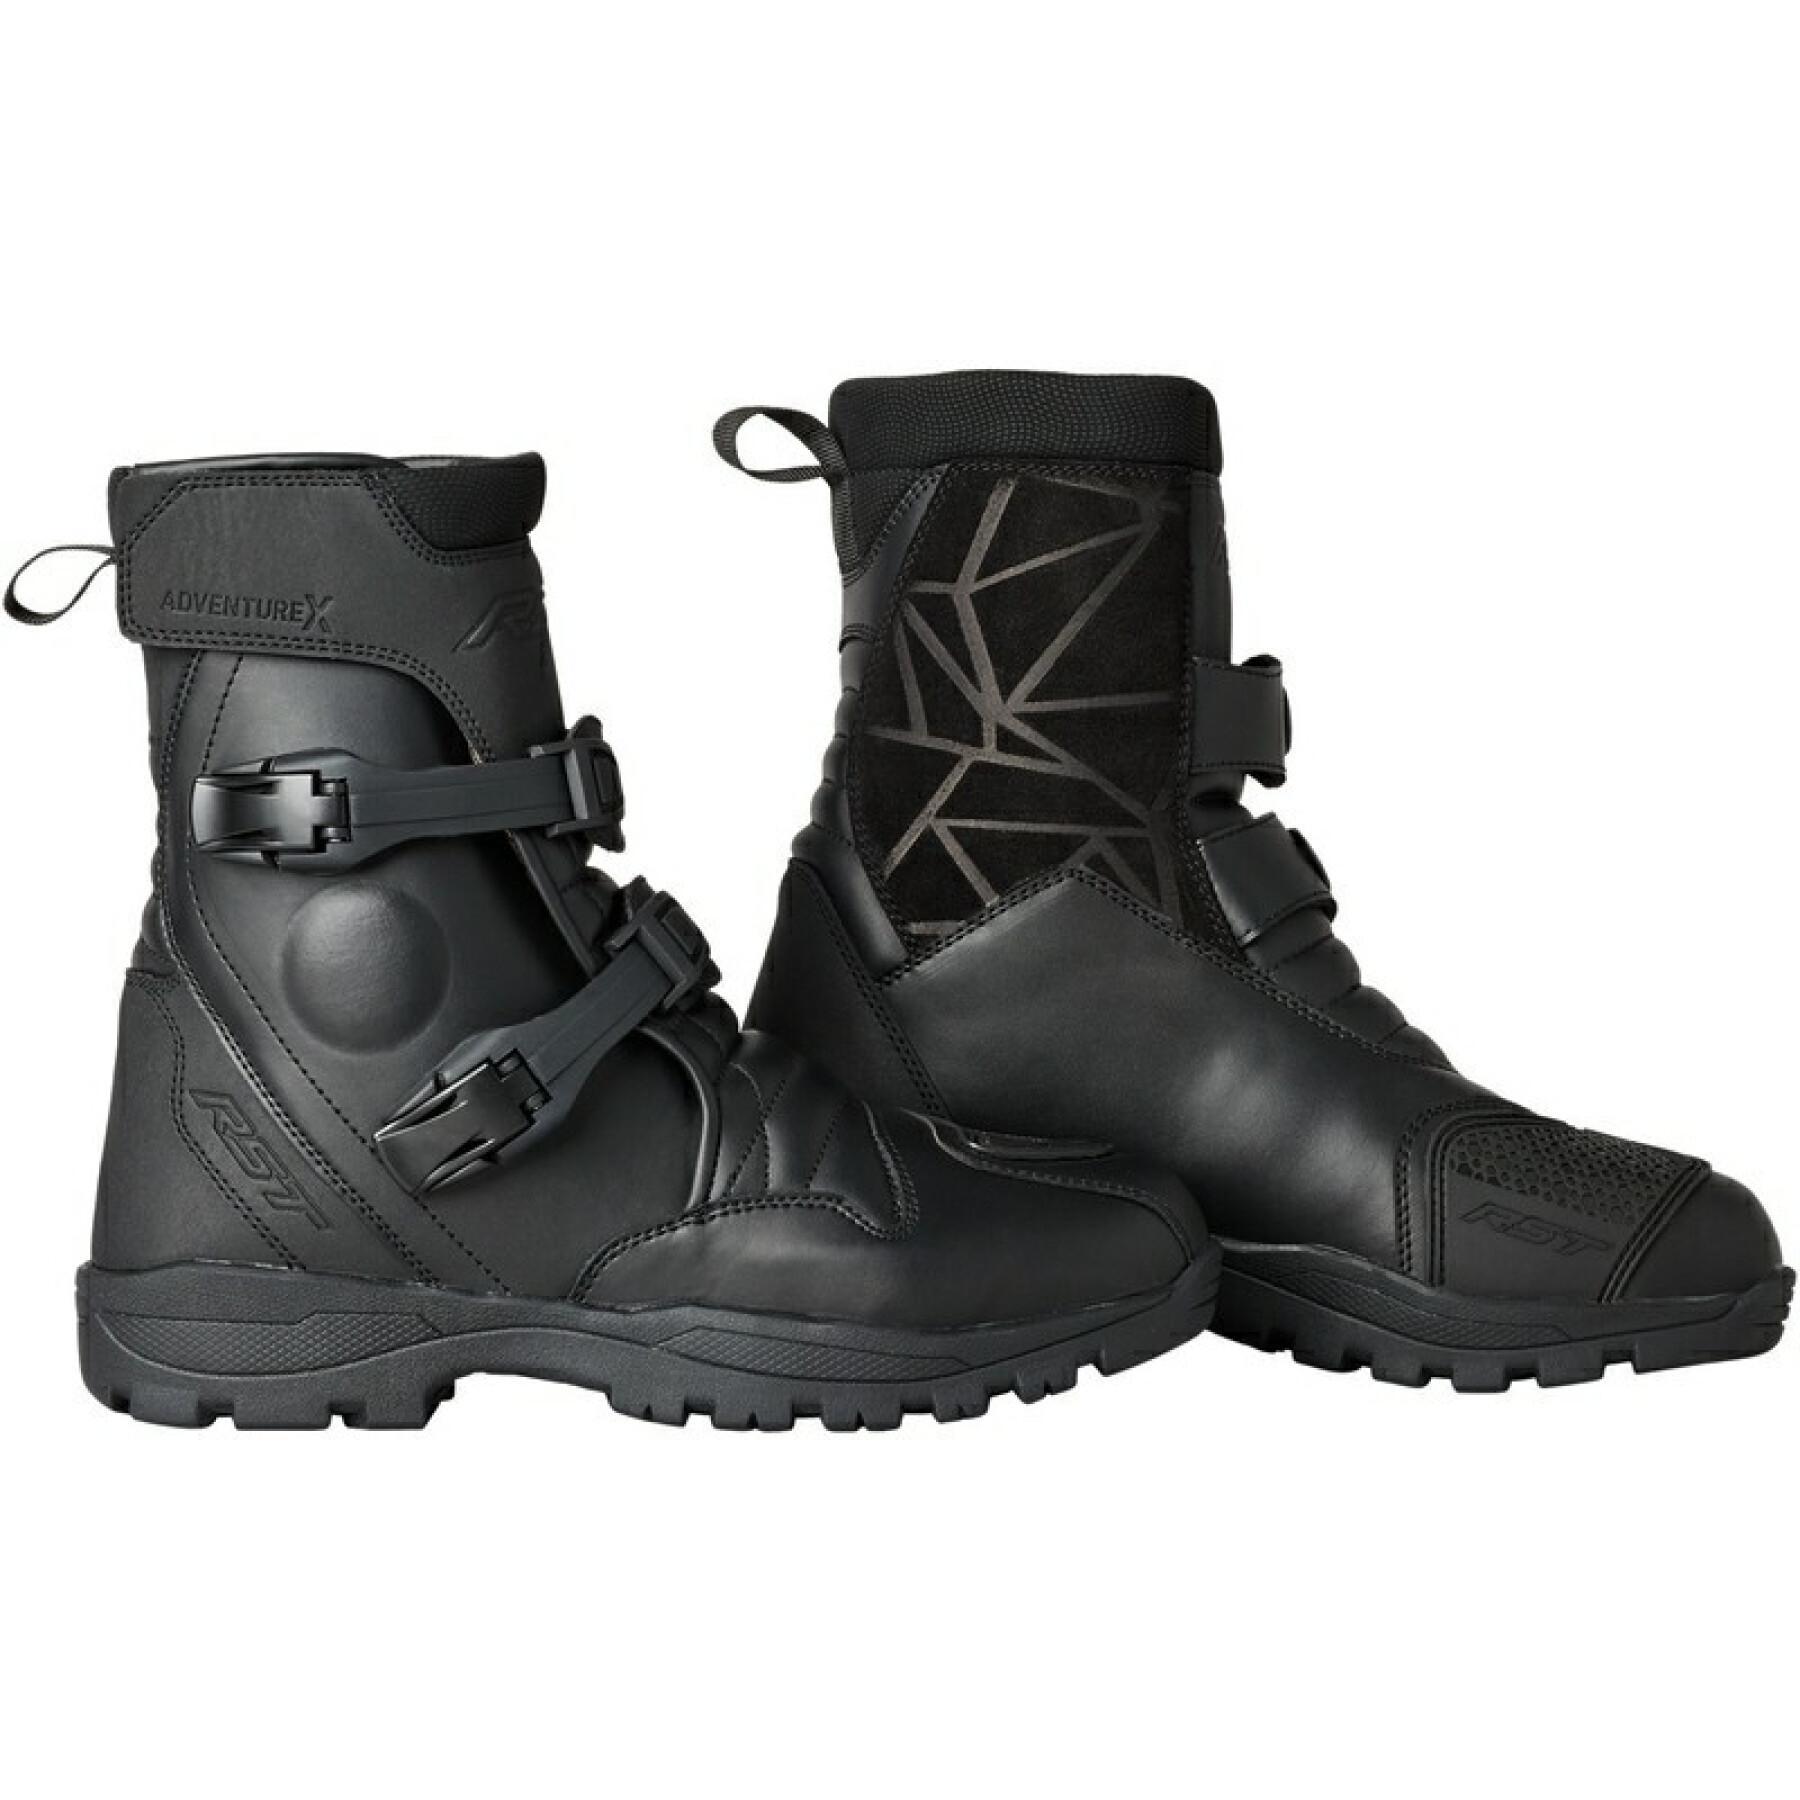 Motocross boots RST ADV-X mid waterproof CE